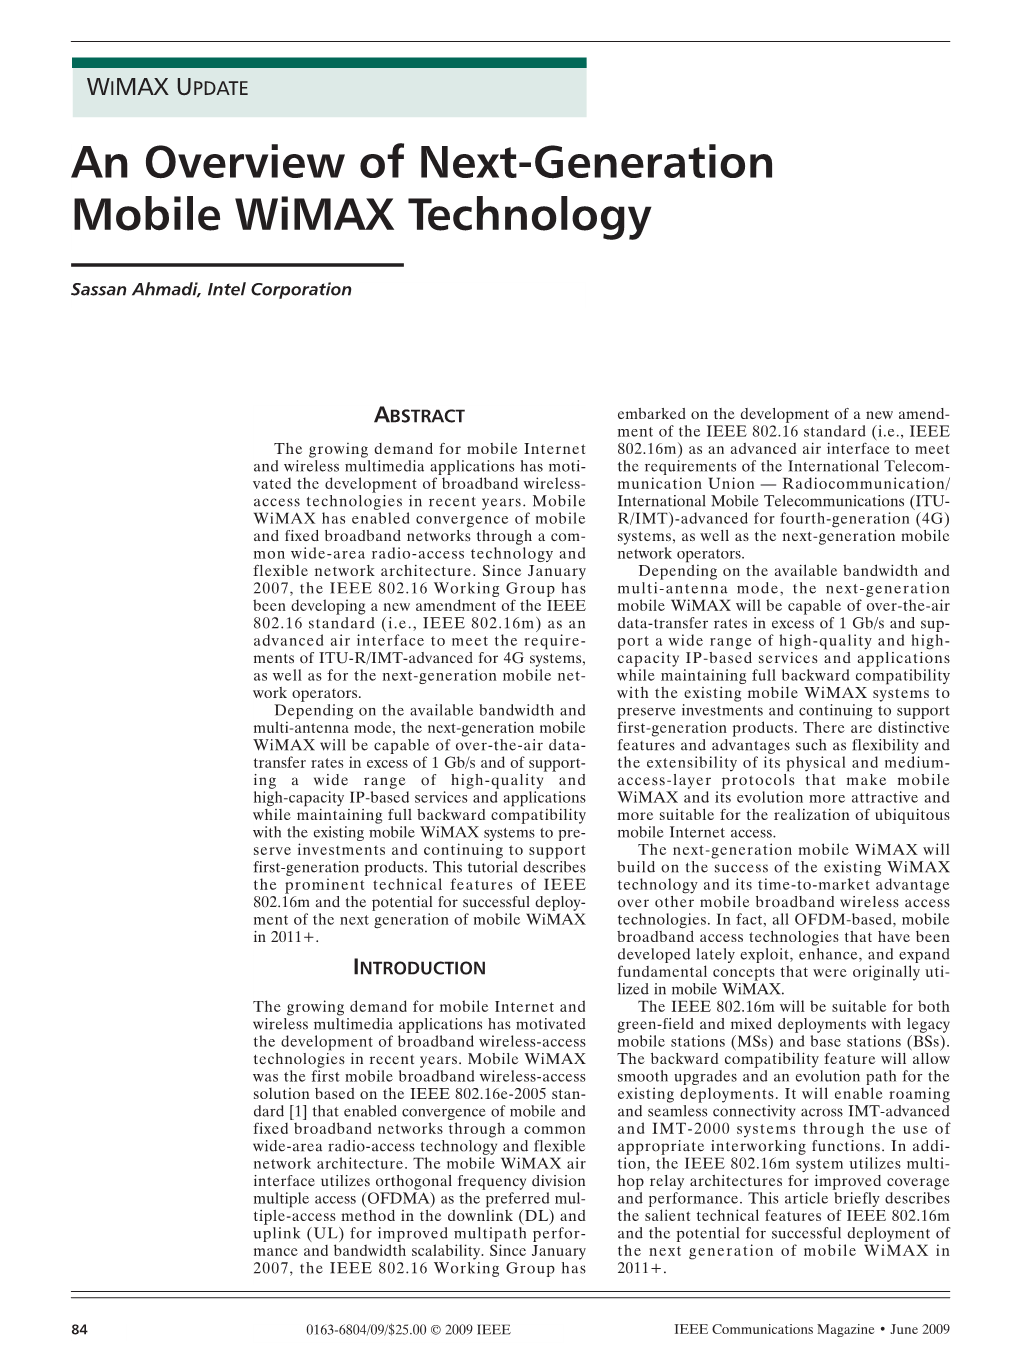 An Overview of Next-Generation Mobile Wimax Technology